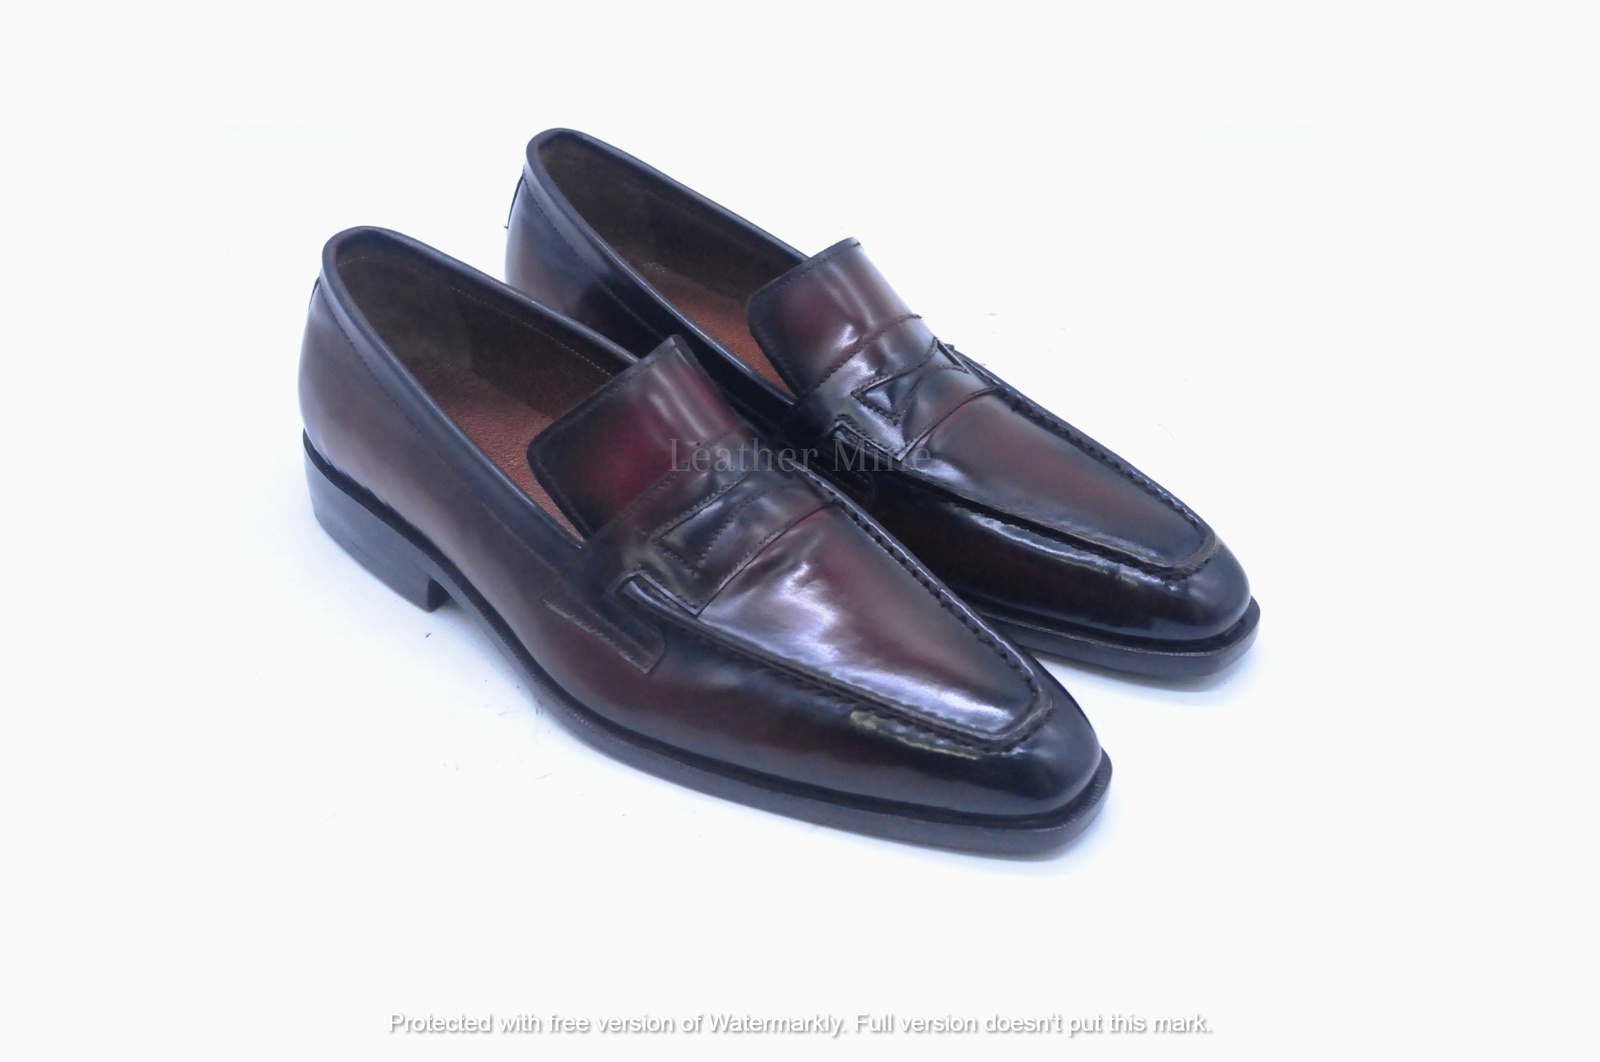 Handmade Ox Blood Patina Loafers Dress Shoes, Genuine Leather Formal Shoes